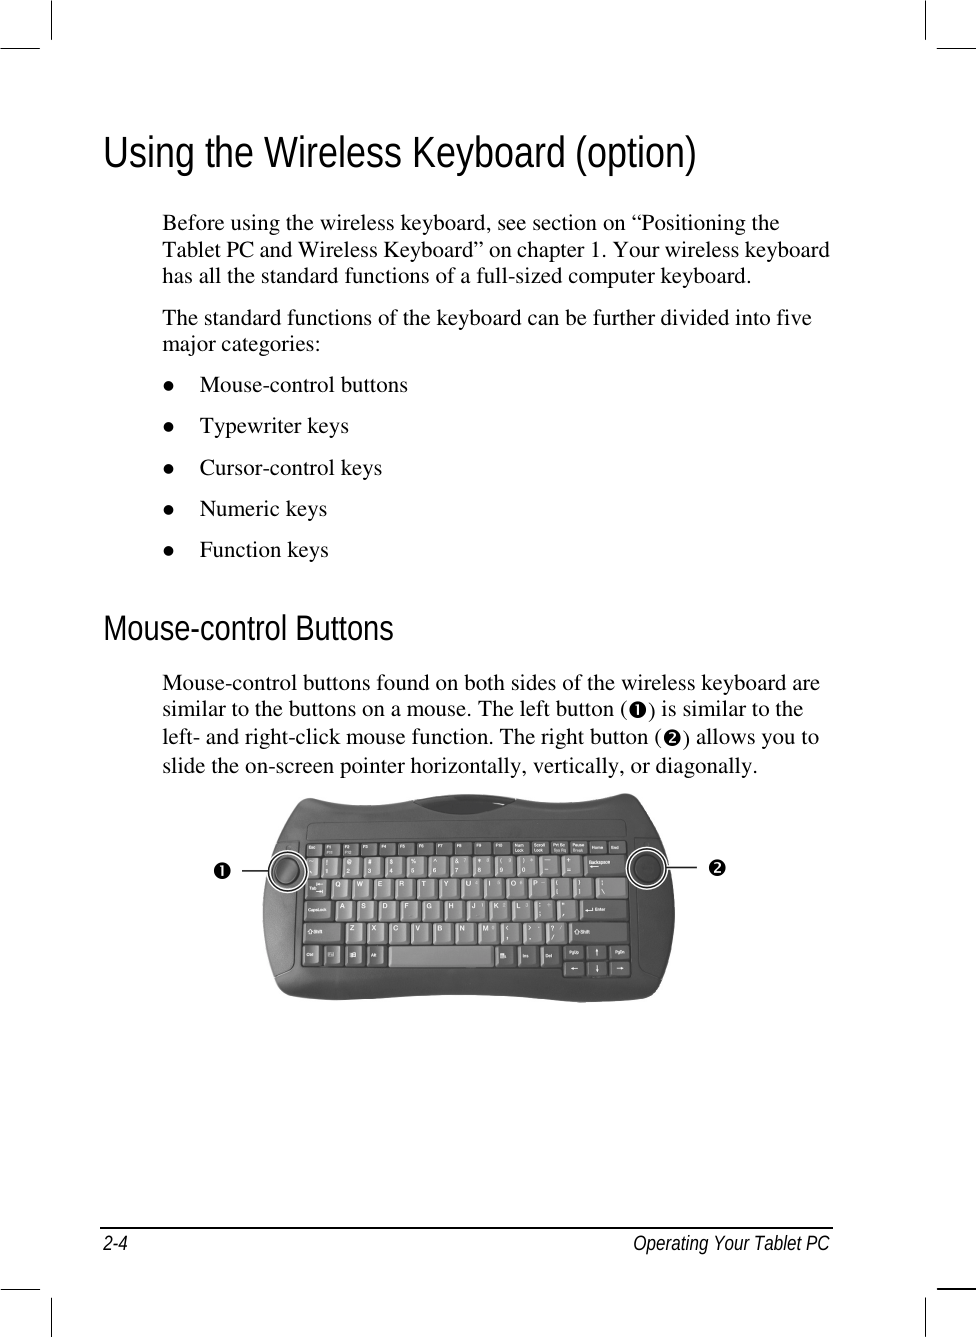  2-4  Operating Your Tablet PC Using the Wireless Keyboard (option) Before using the wireless keyboard, see section on “Positioning the Tablet PC and Wireless Keyboard” on chapter 1. Your wireless keyboard has all the standard functions of a full-sized computer keyboard. The standard functions of the keyboard can be further divided into five major categories: !  Mouse-control buttons !  Typewriter keys !  Cursor-control keys !  Numeric keys !  Function keys Mouse-control Buttons Mouse-control buttons found on both sides of the wireless keyboard are similar to the buttons on a mouse. The left button (#) is similar to the left- and right-click mouse function. The right button ($) allows you to slide the on-screen pointer horizontally, vertically, or diagonally.    # $ 